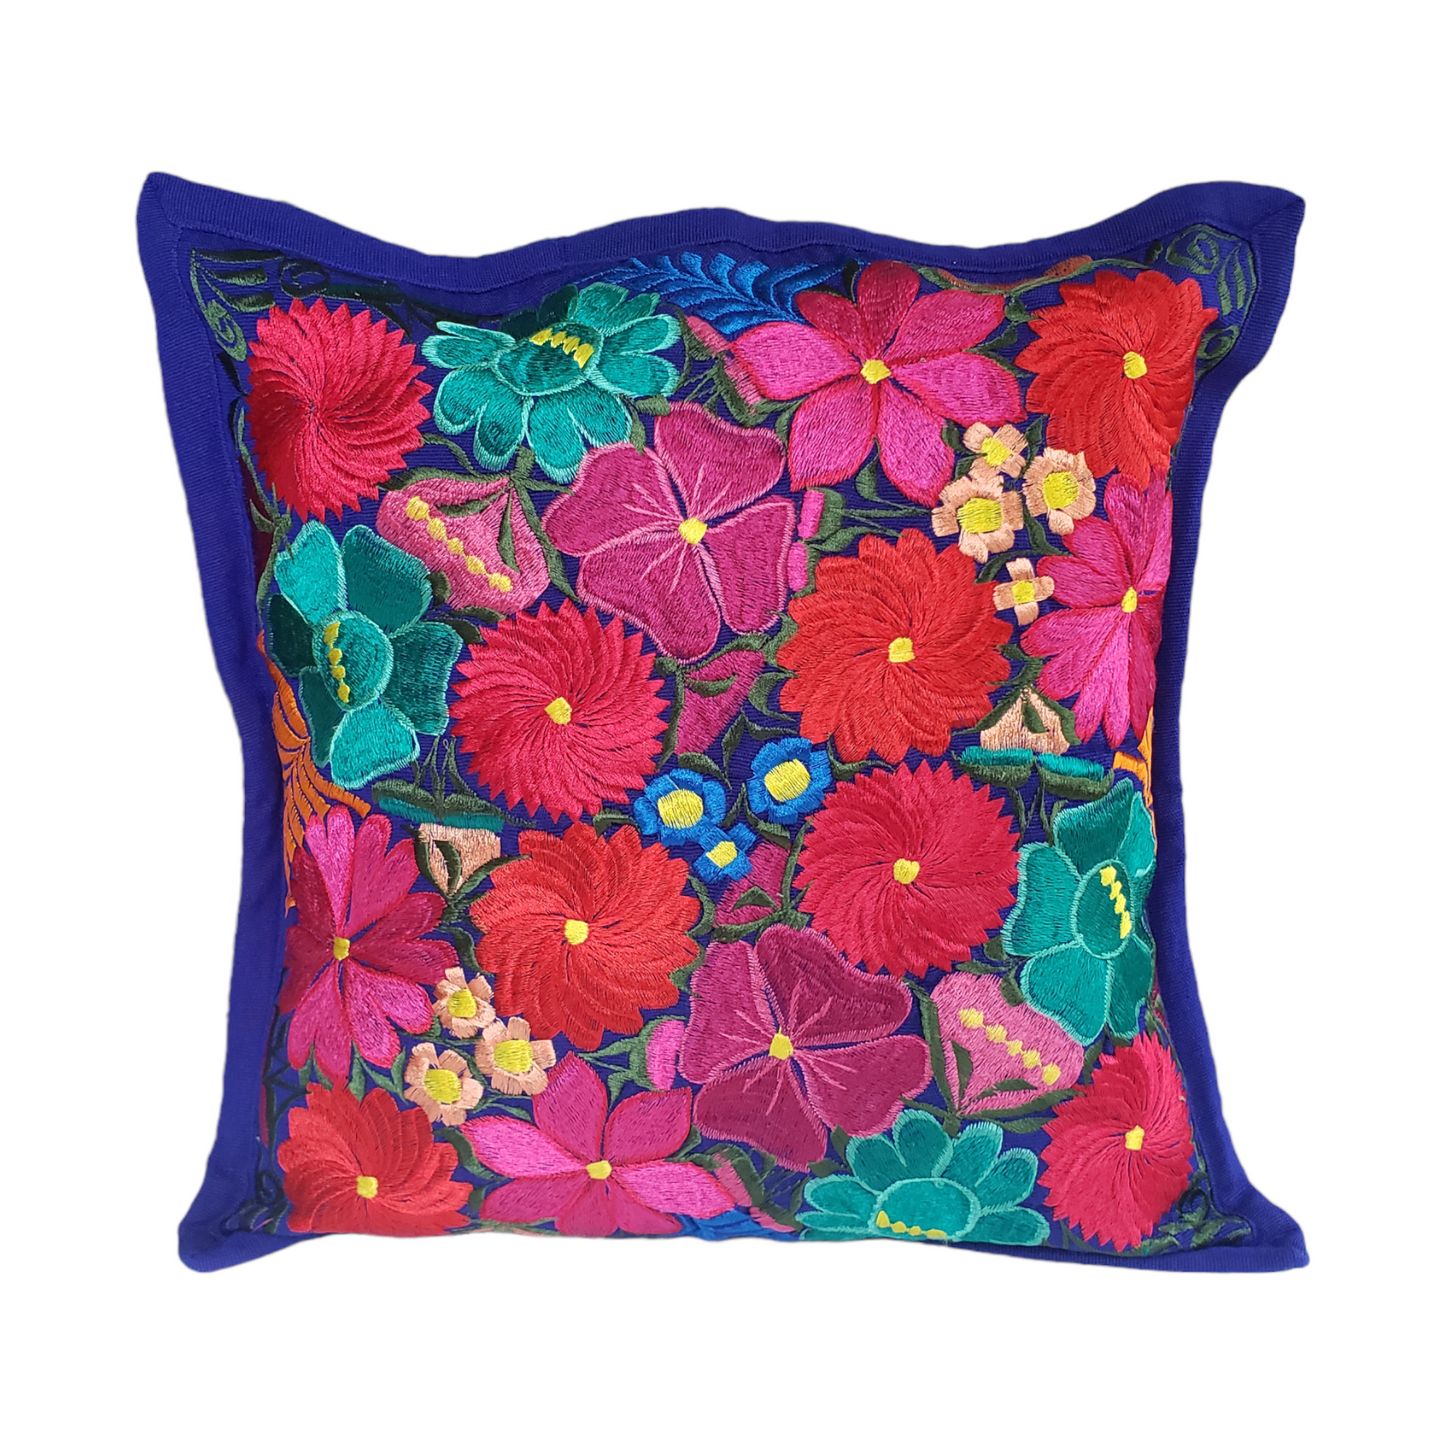 Set of 2 Mexican Pillow Covers Oaxaca Handmade Floral Embroidered Decorative Pillow Case 19"x19"